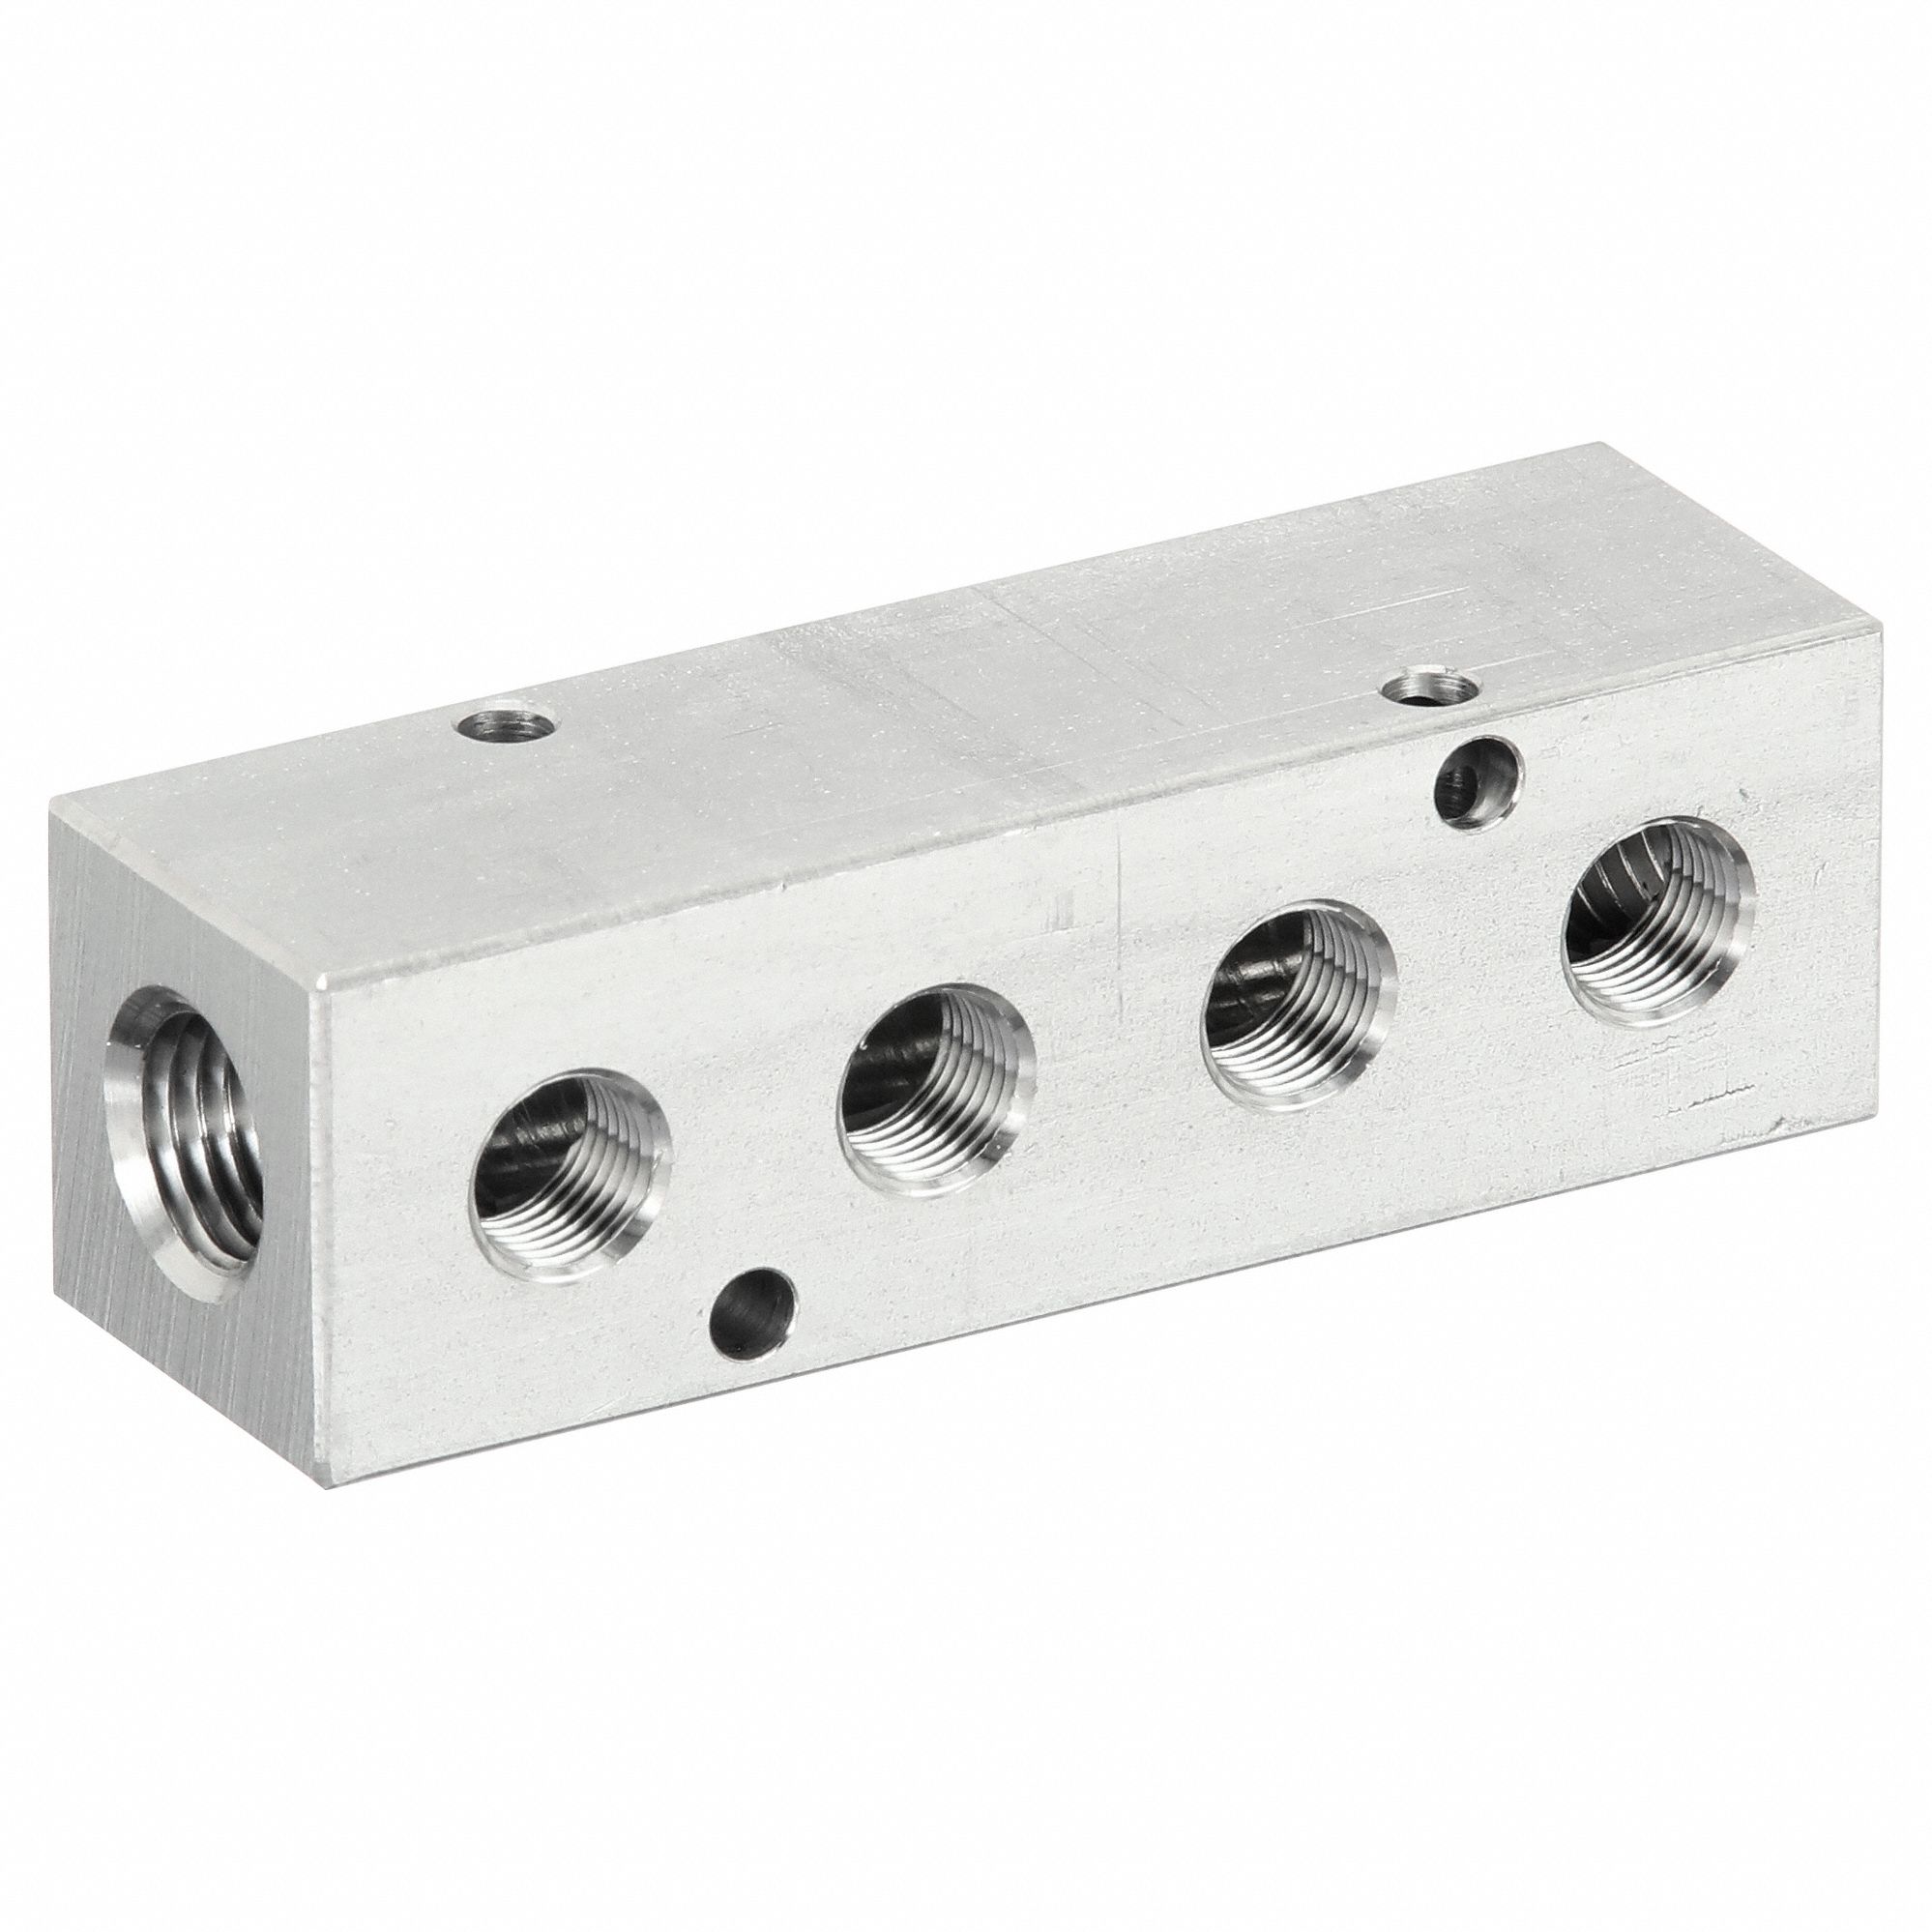 MANIFOLD,STAINLESS STEEL,NPT,3-1/4 IN. L